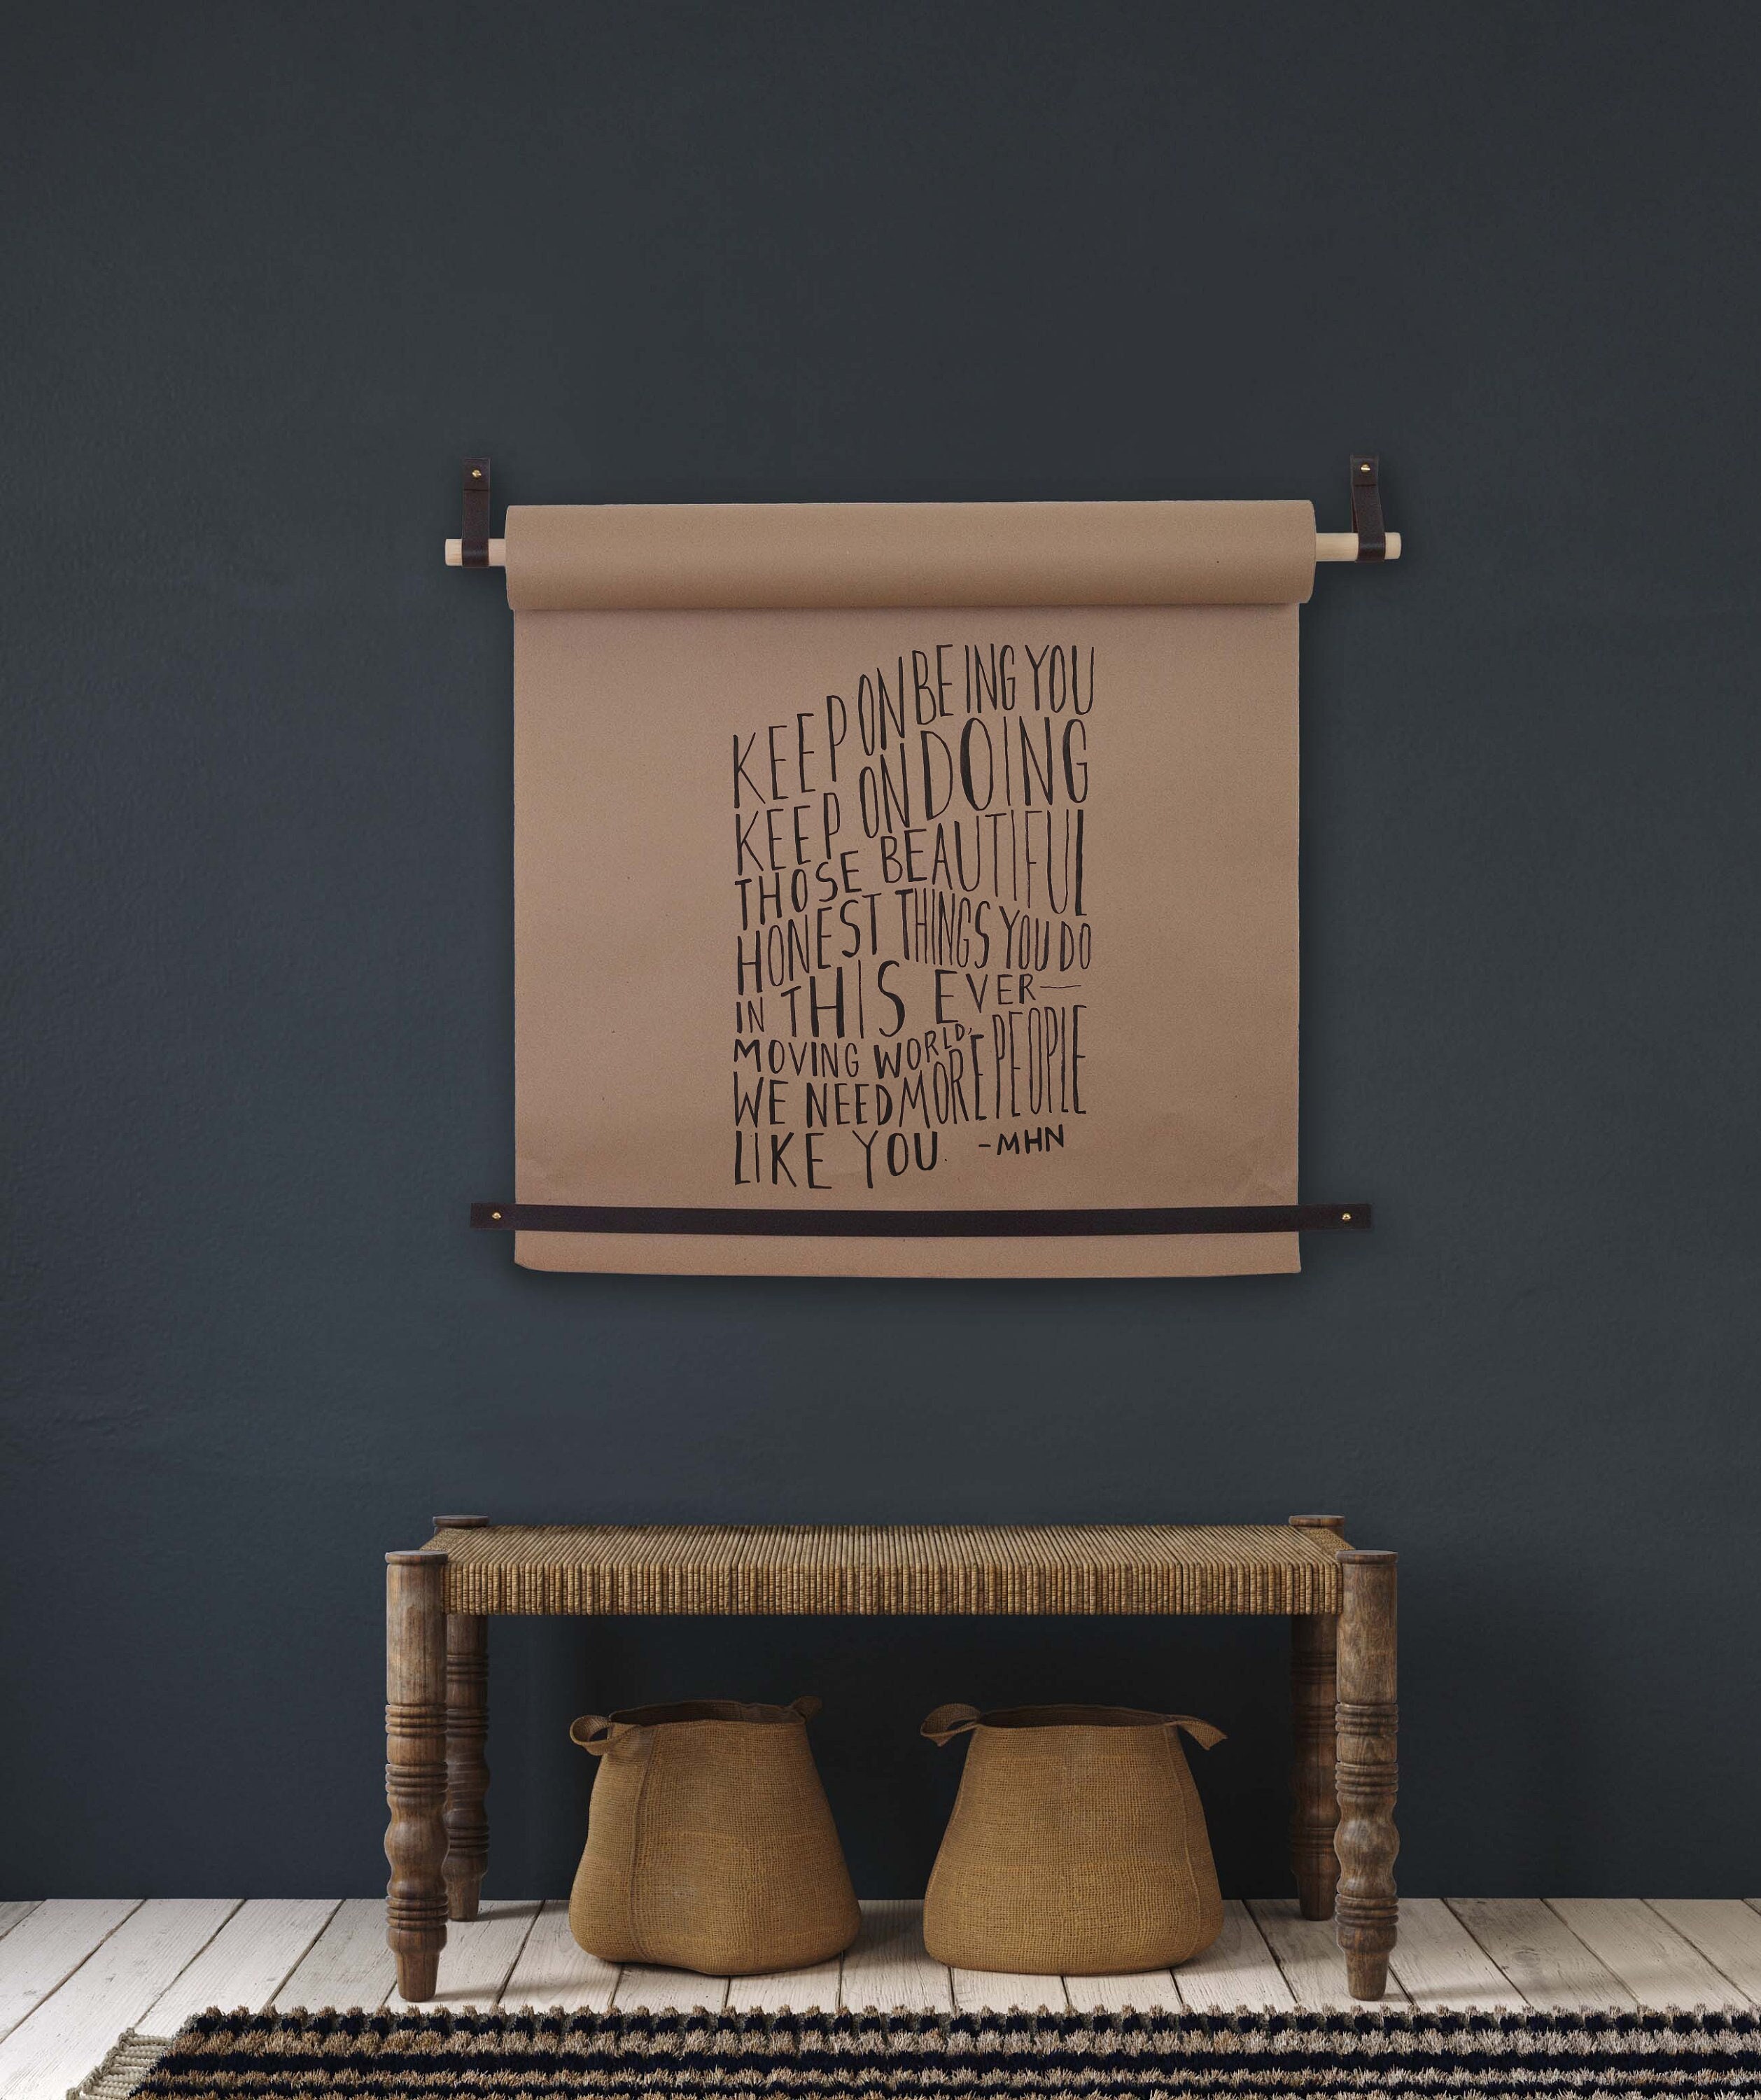 Wall mounted Butcher paper roll  Workspace makeover, Home furnishing  accessories, Butcher paper